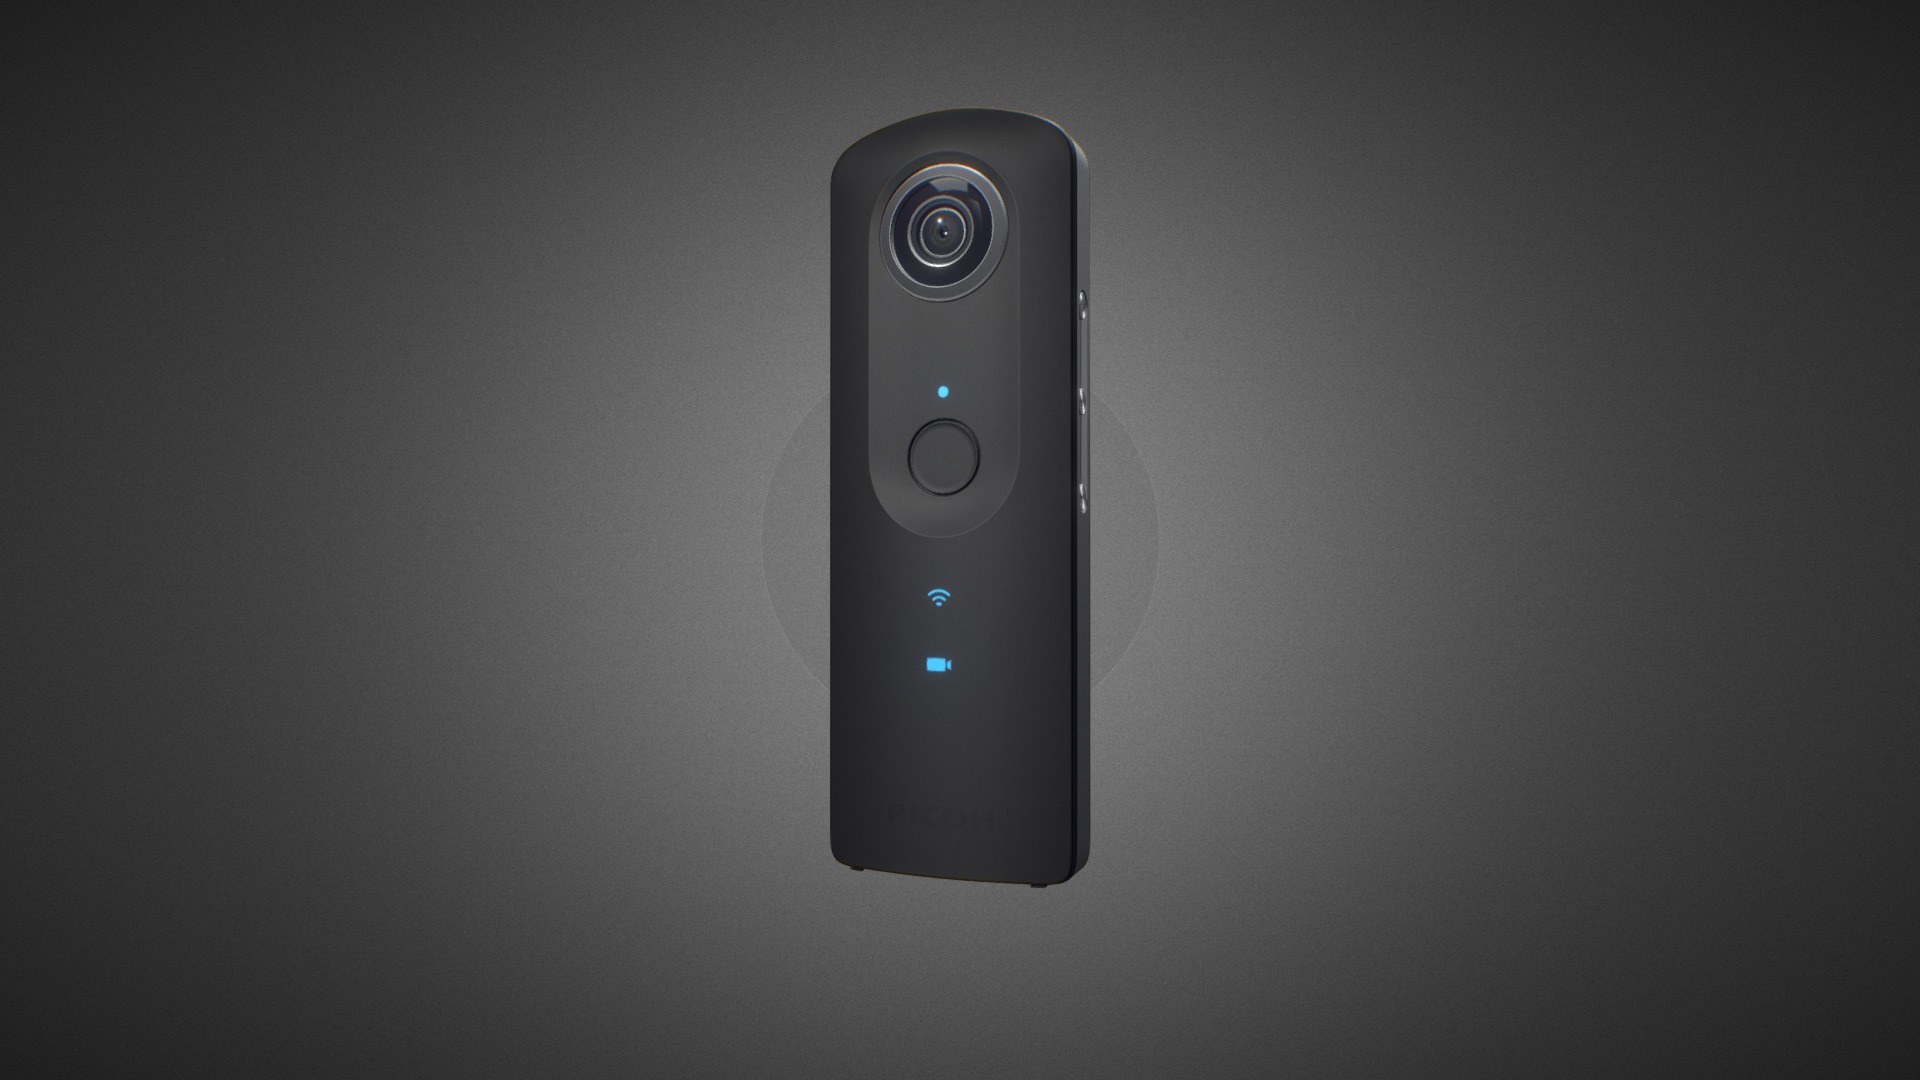 3D model Ricoh Theta S 360 for Element 3D - This is a 3D model of the Ricoh Theta S 360 for Element 3D. The 3D model is about a rectangular cellular device.